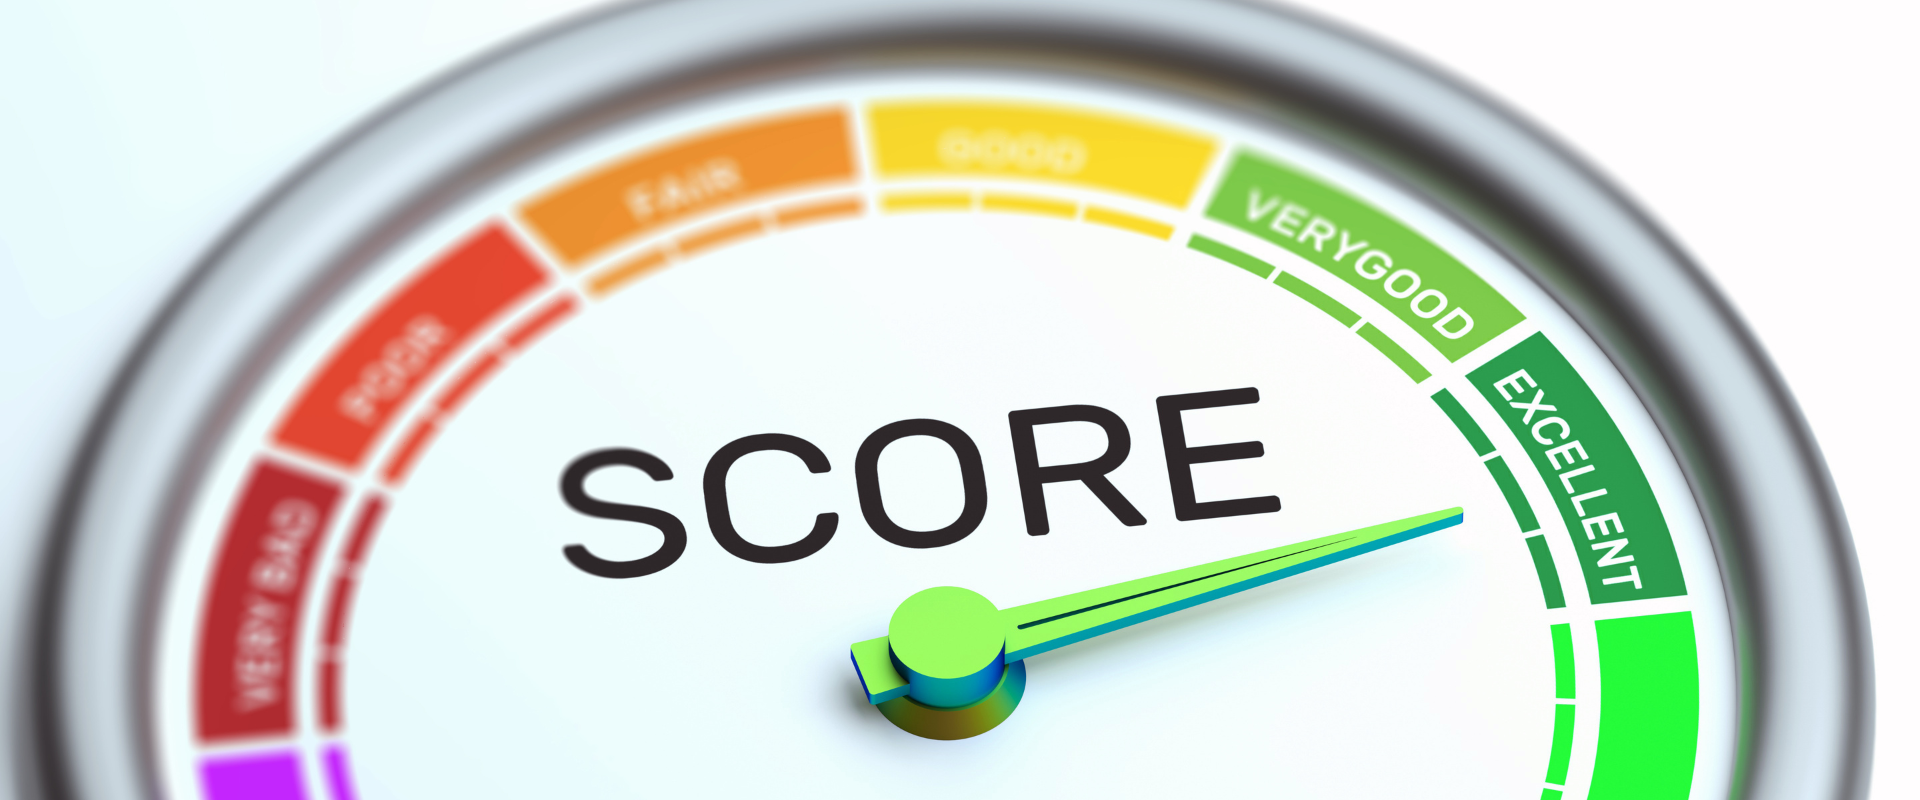 What Is Your Microsoft Secure Score? Understanding Your Cybersecurity Posture